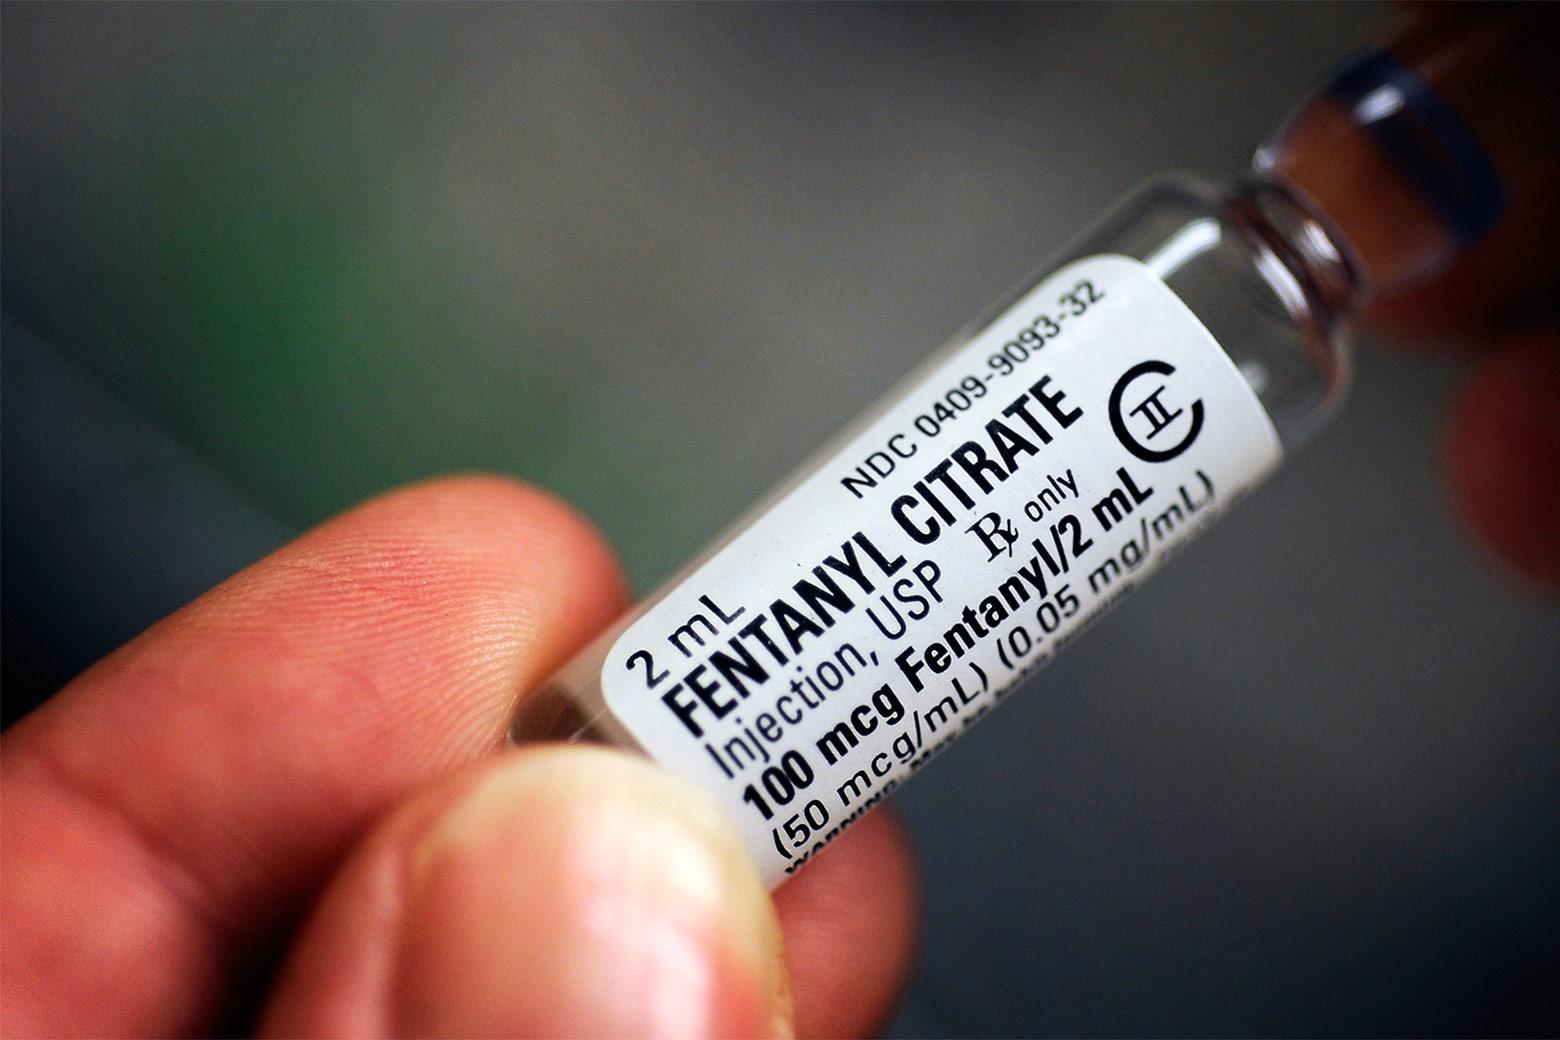 A vial of fentanyl citrate.